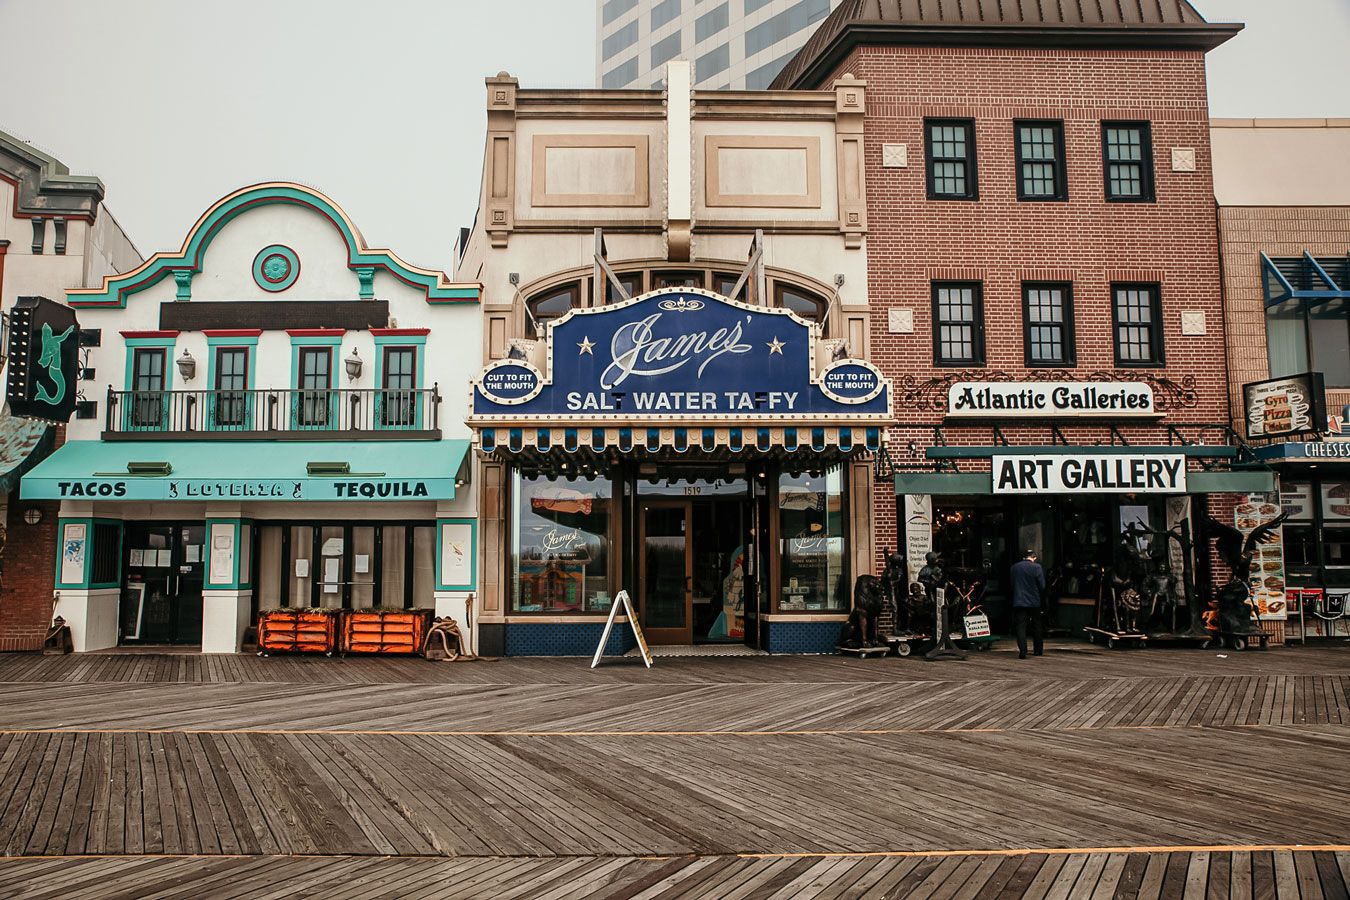 The colorful shops and restaurants of the boardwalk.